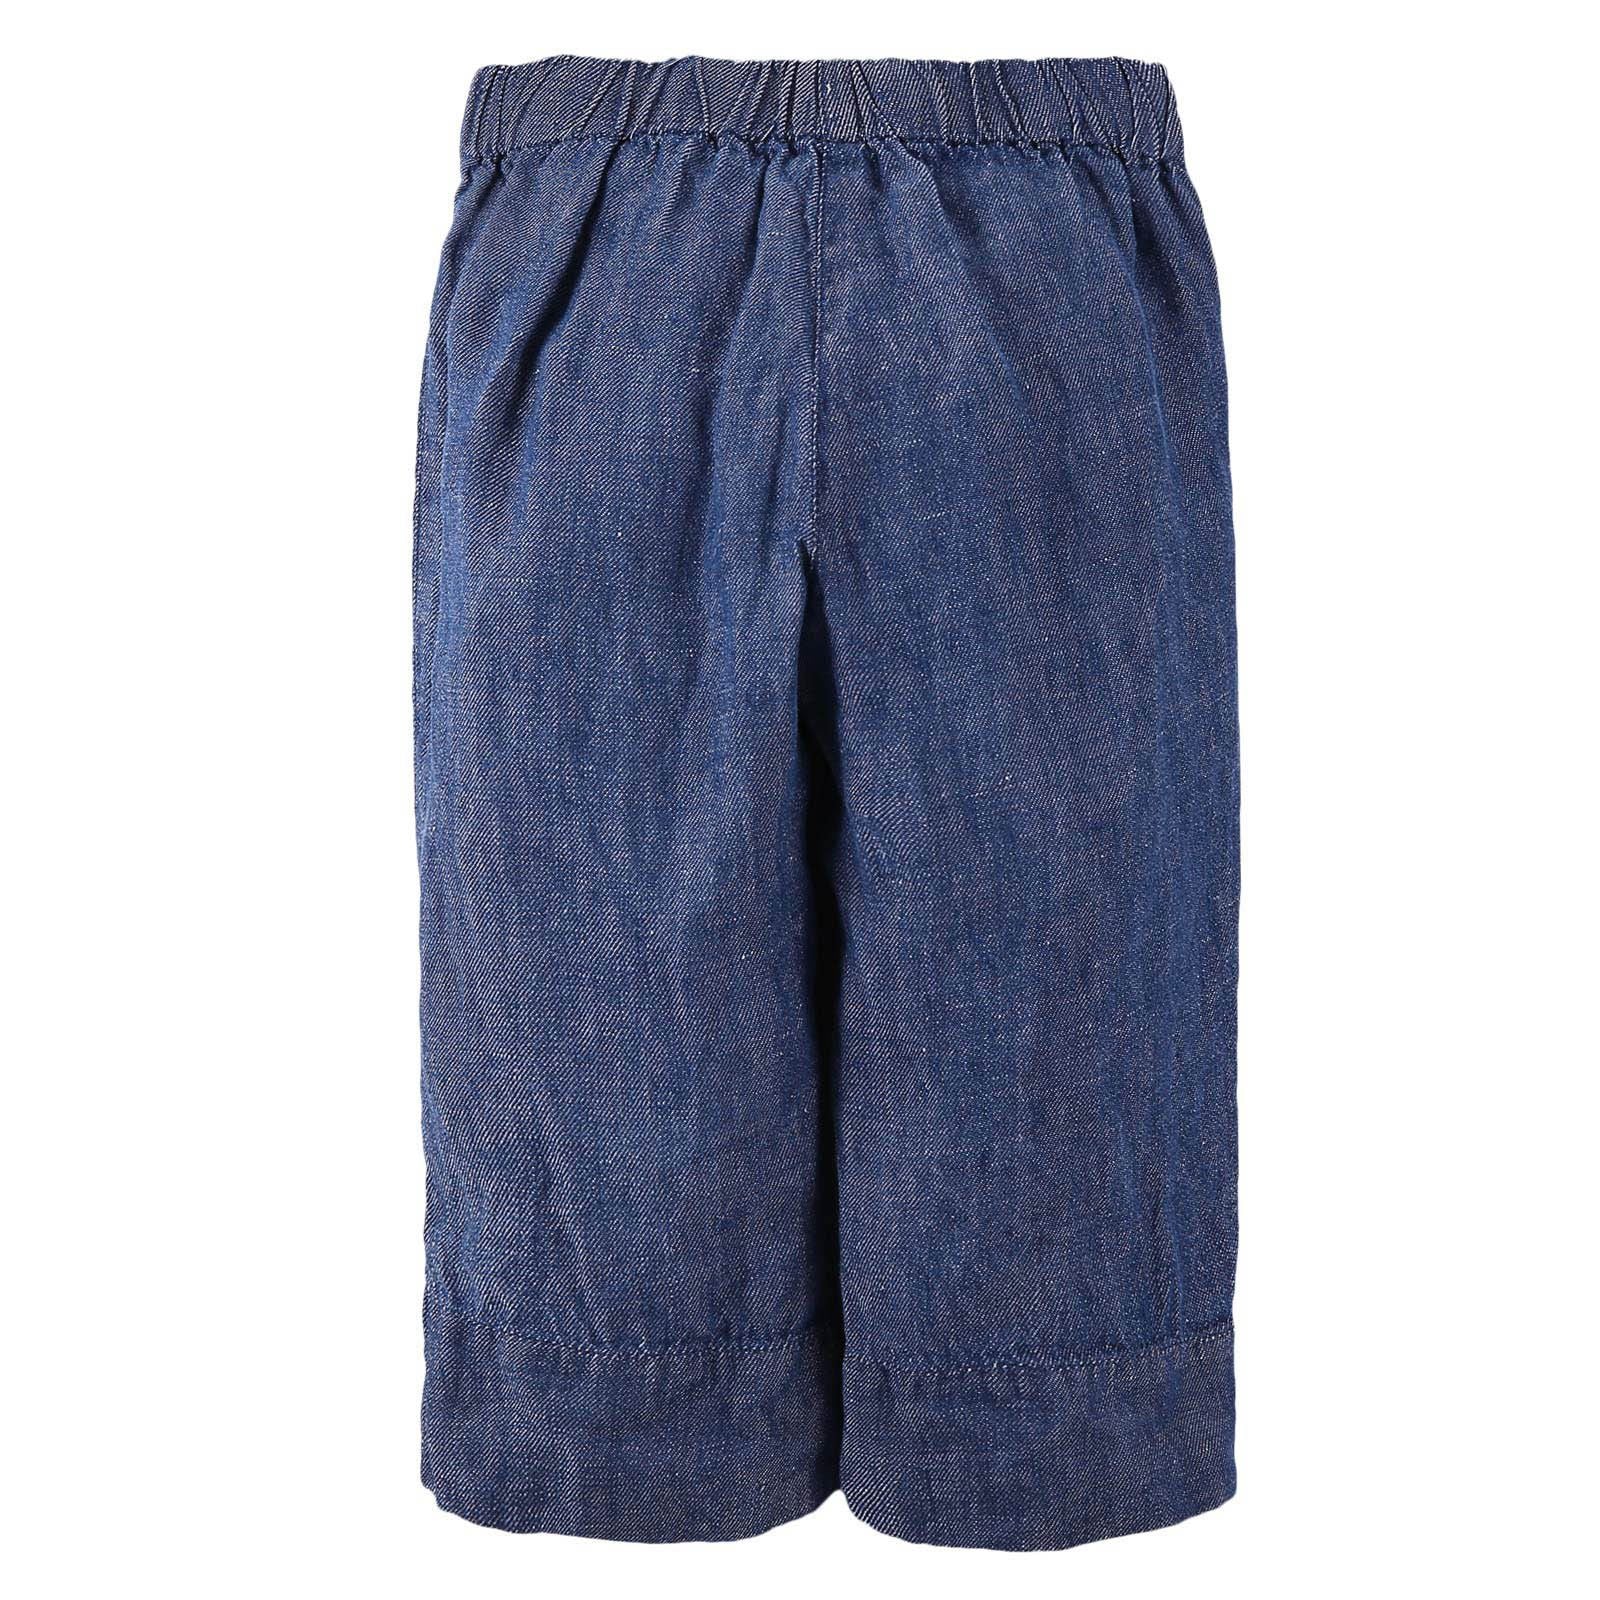 Girls Navy Blue Linen Trousers With Turn Up Hems - CÉMAROSE | Children's Fashion Store - 2